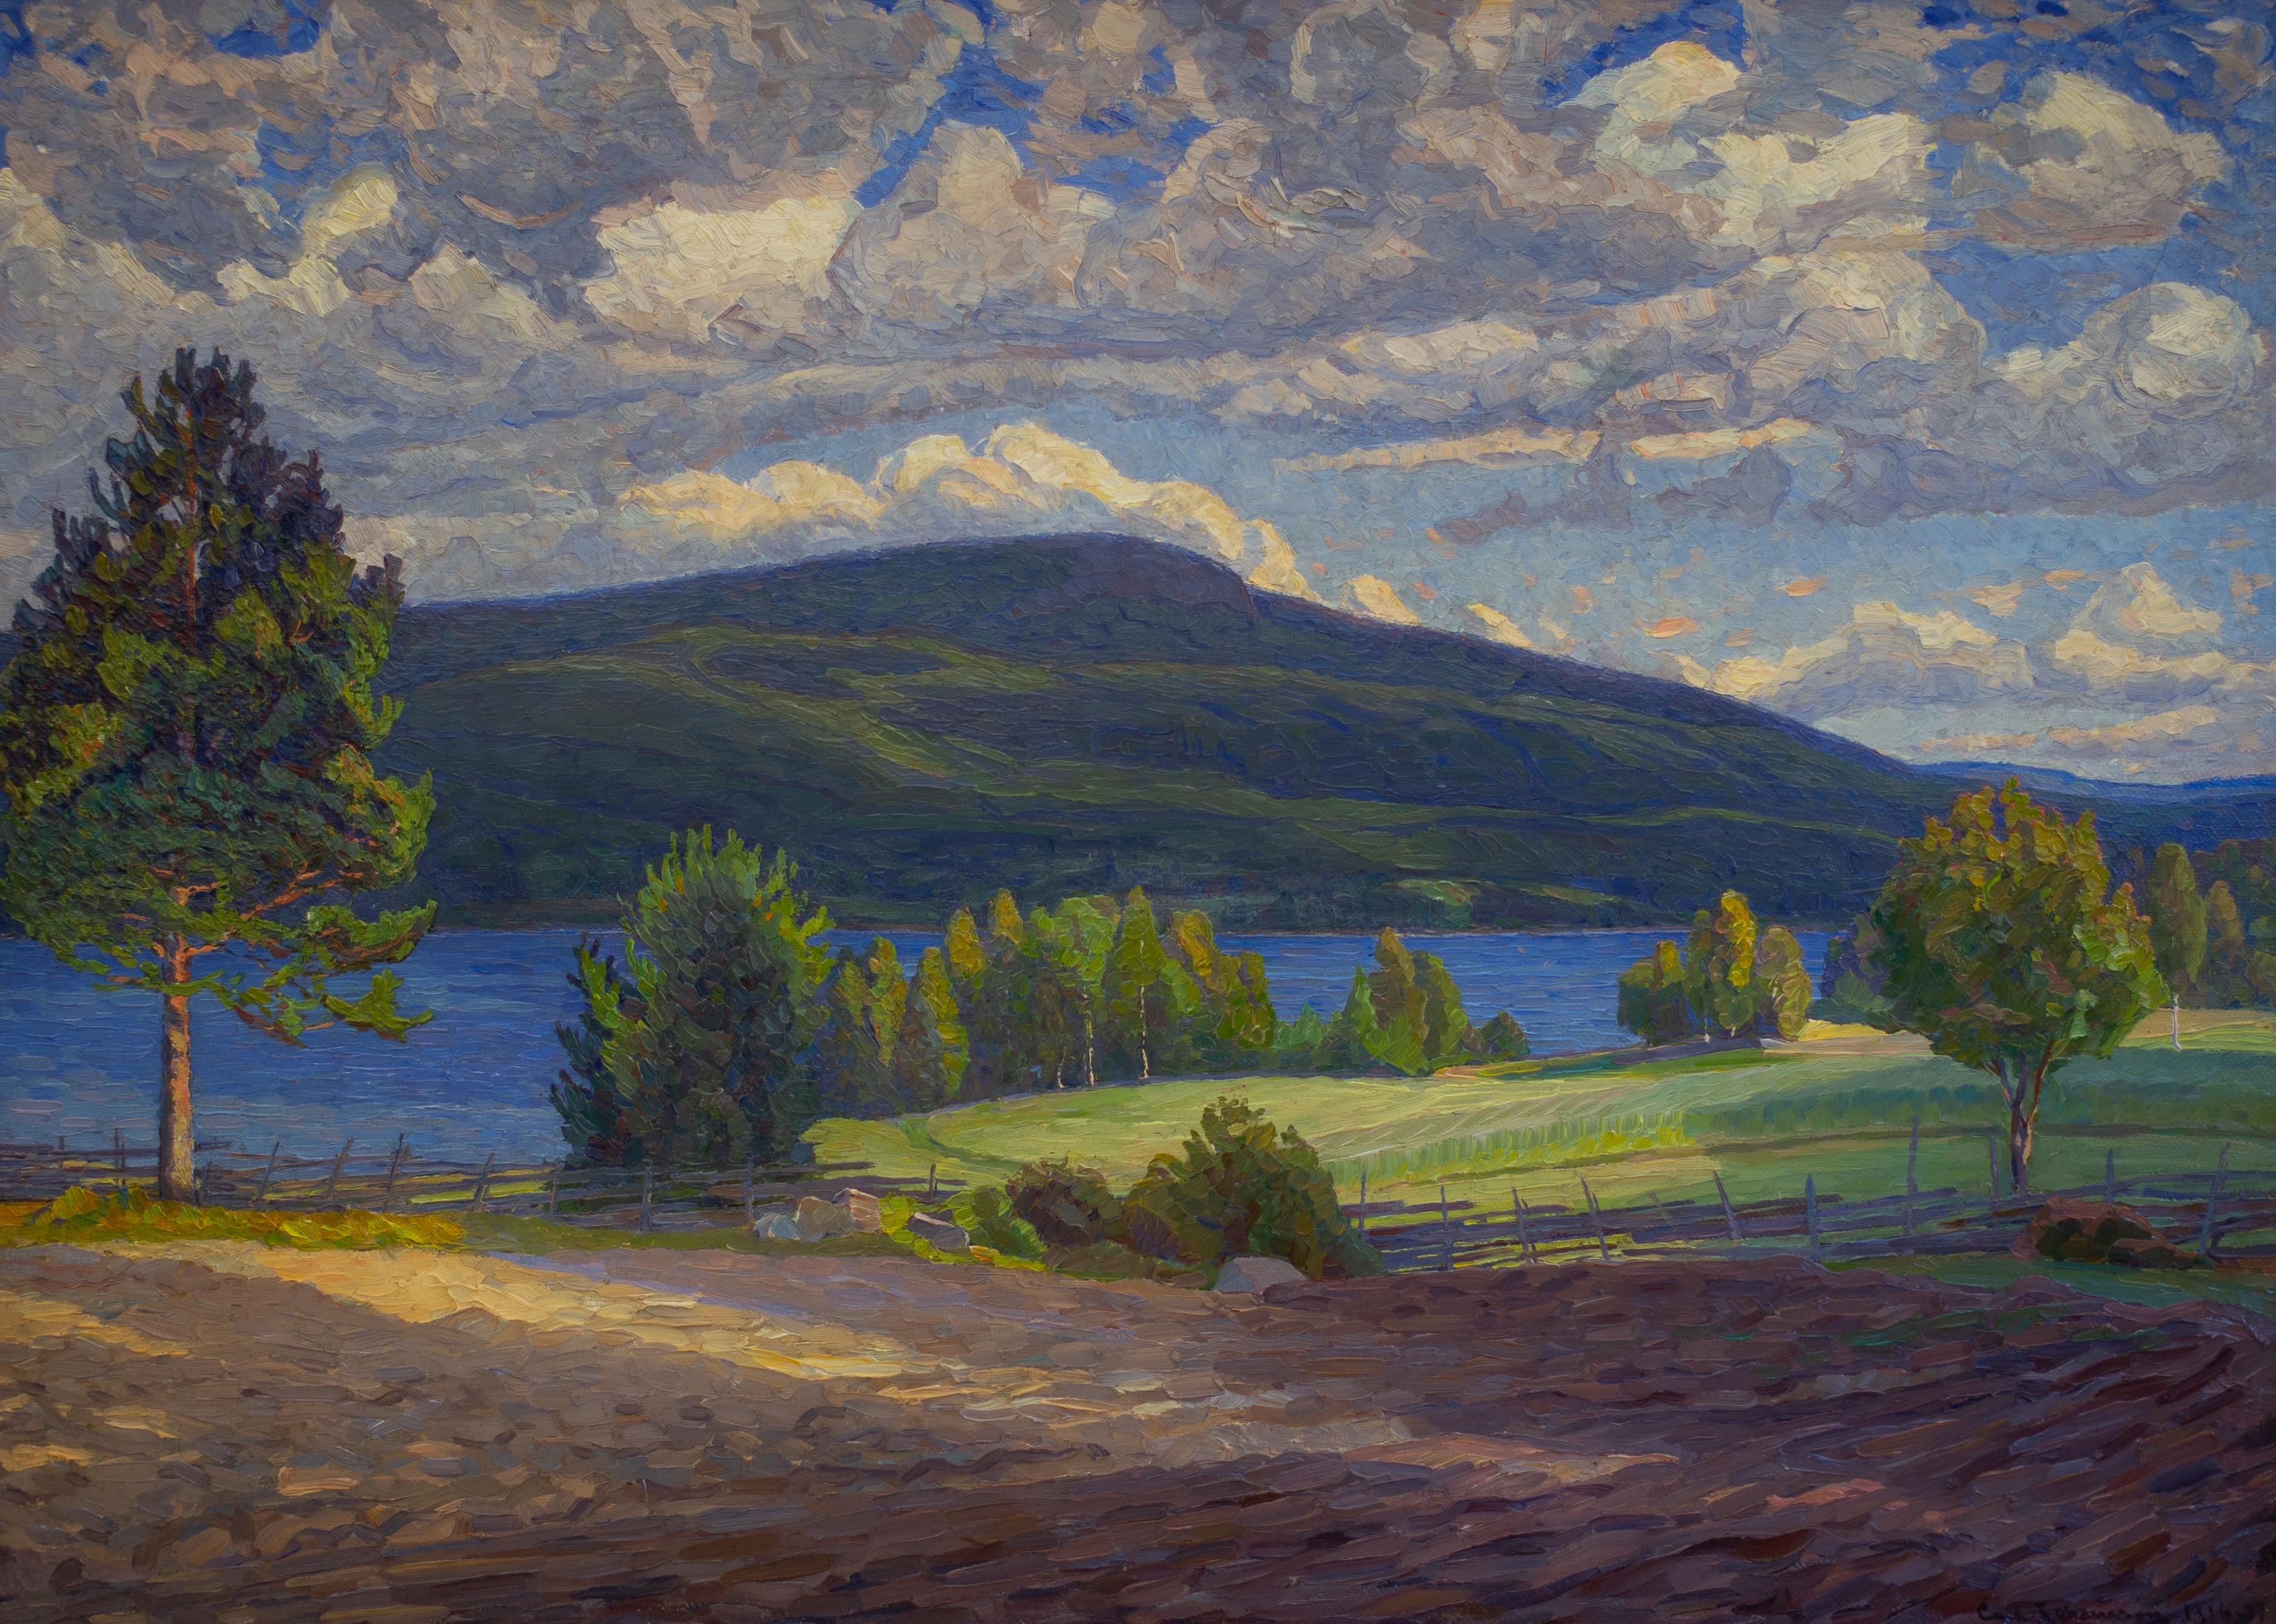 Summer Landscape From Sweden by Carl Johansson, Painted 1916, Oil on Canvas  - Painting by Carl Johansson 